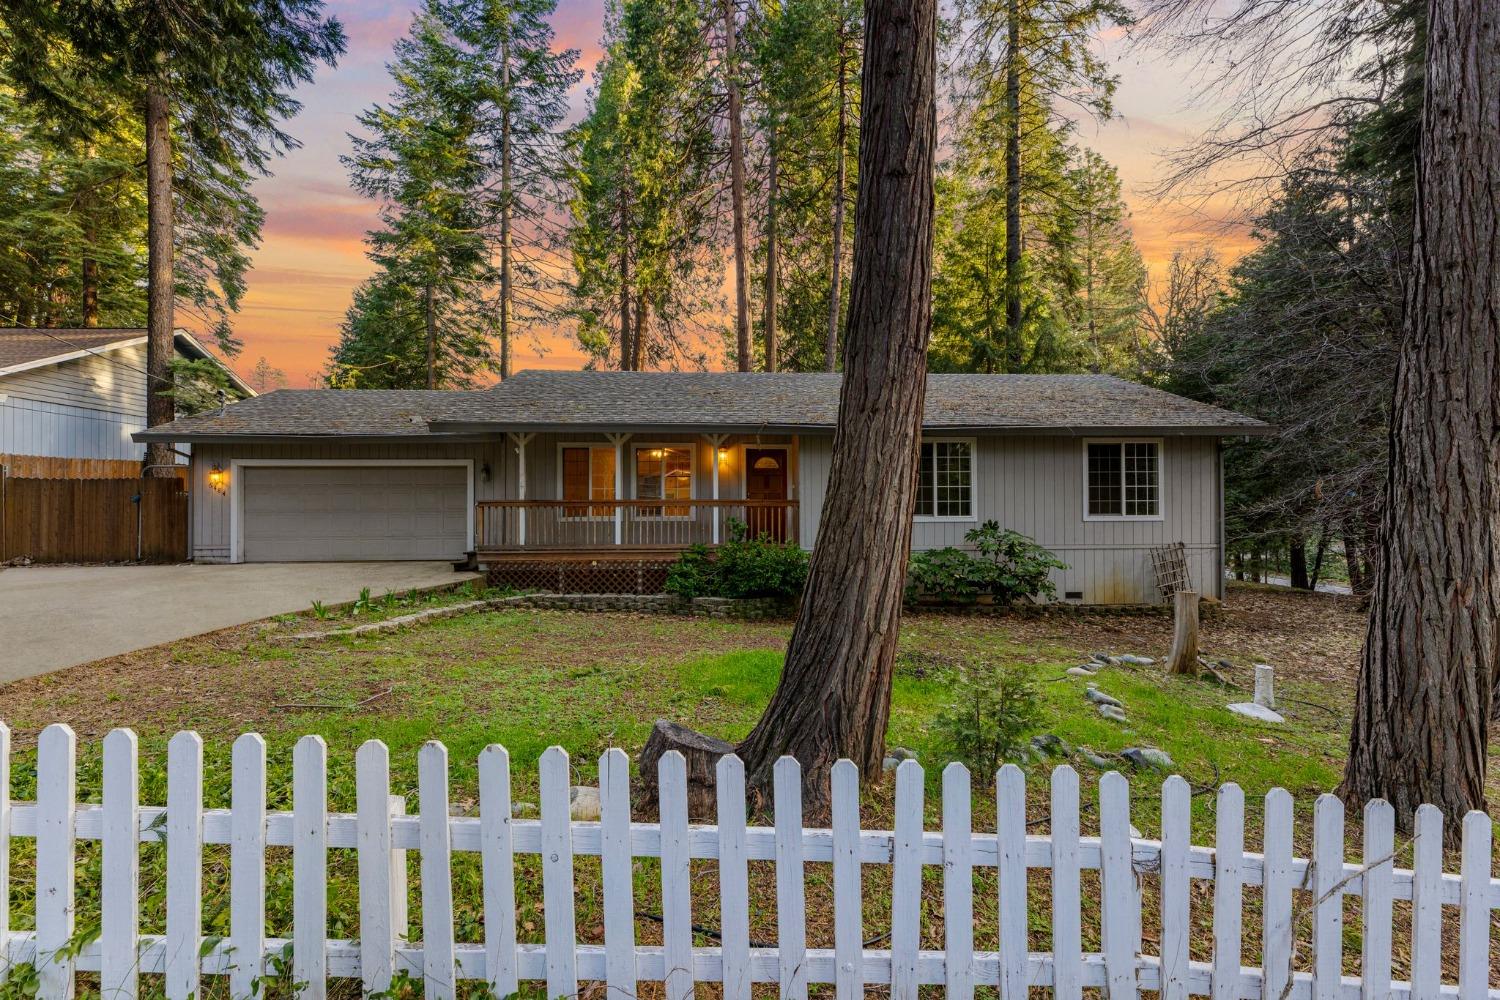 Photo of 6484 Dobson Wy in Pollock Pines, CA